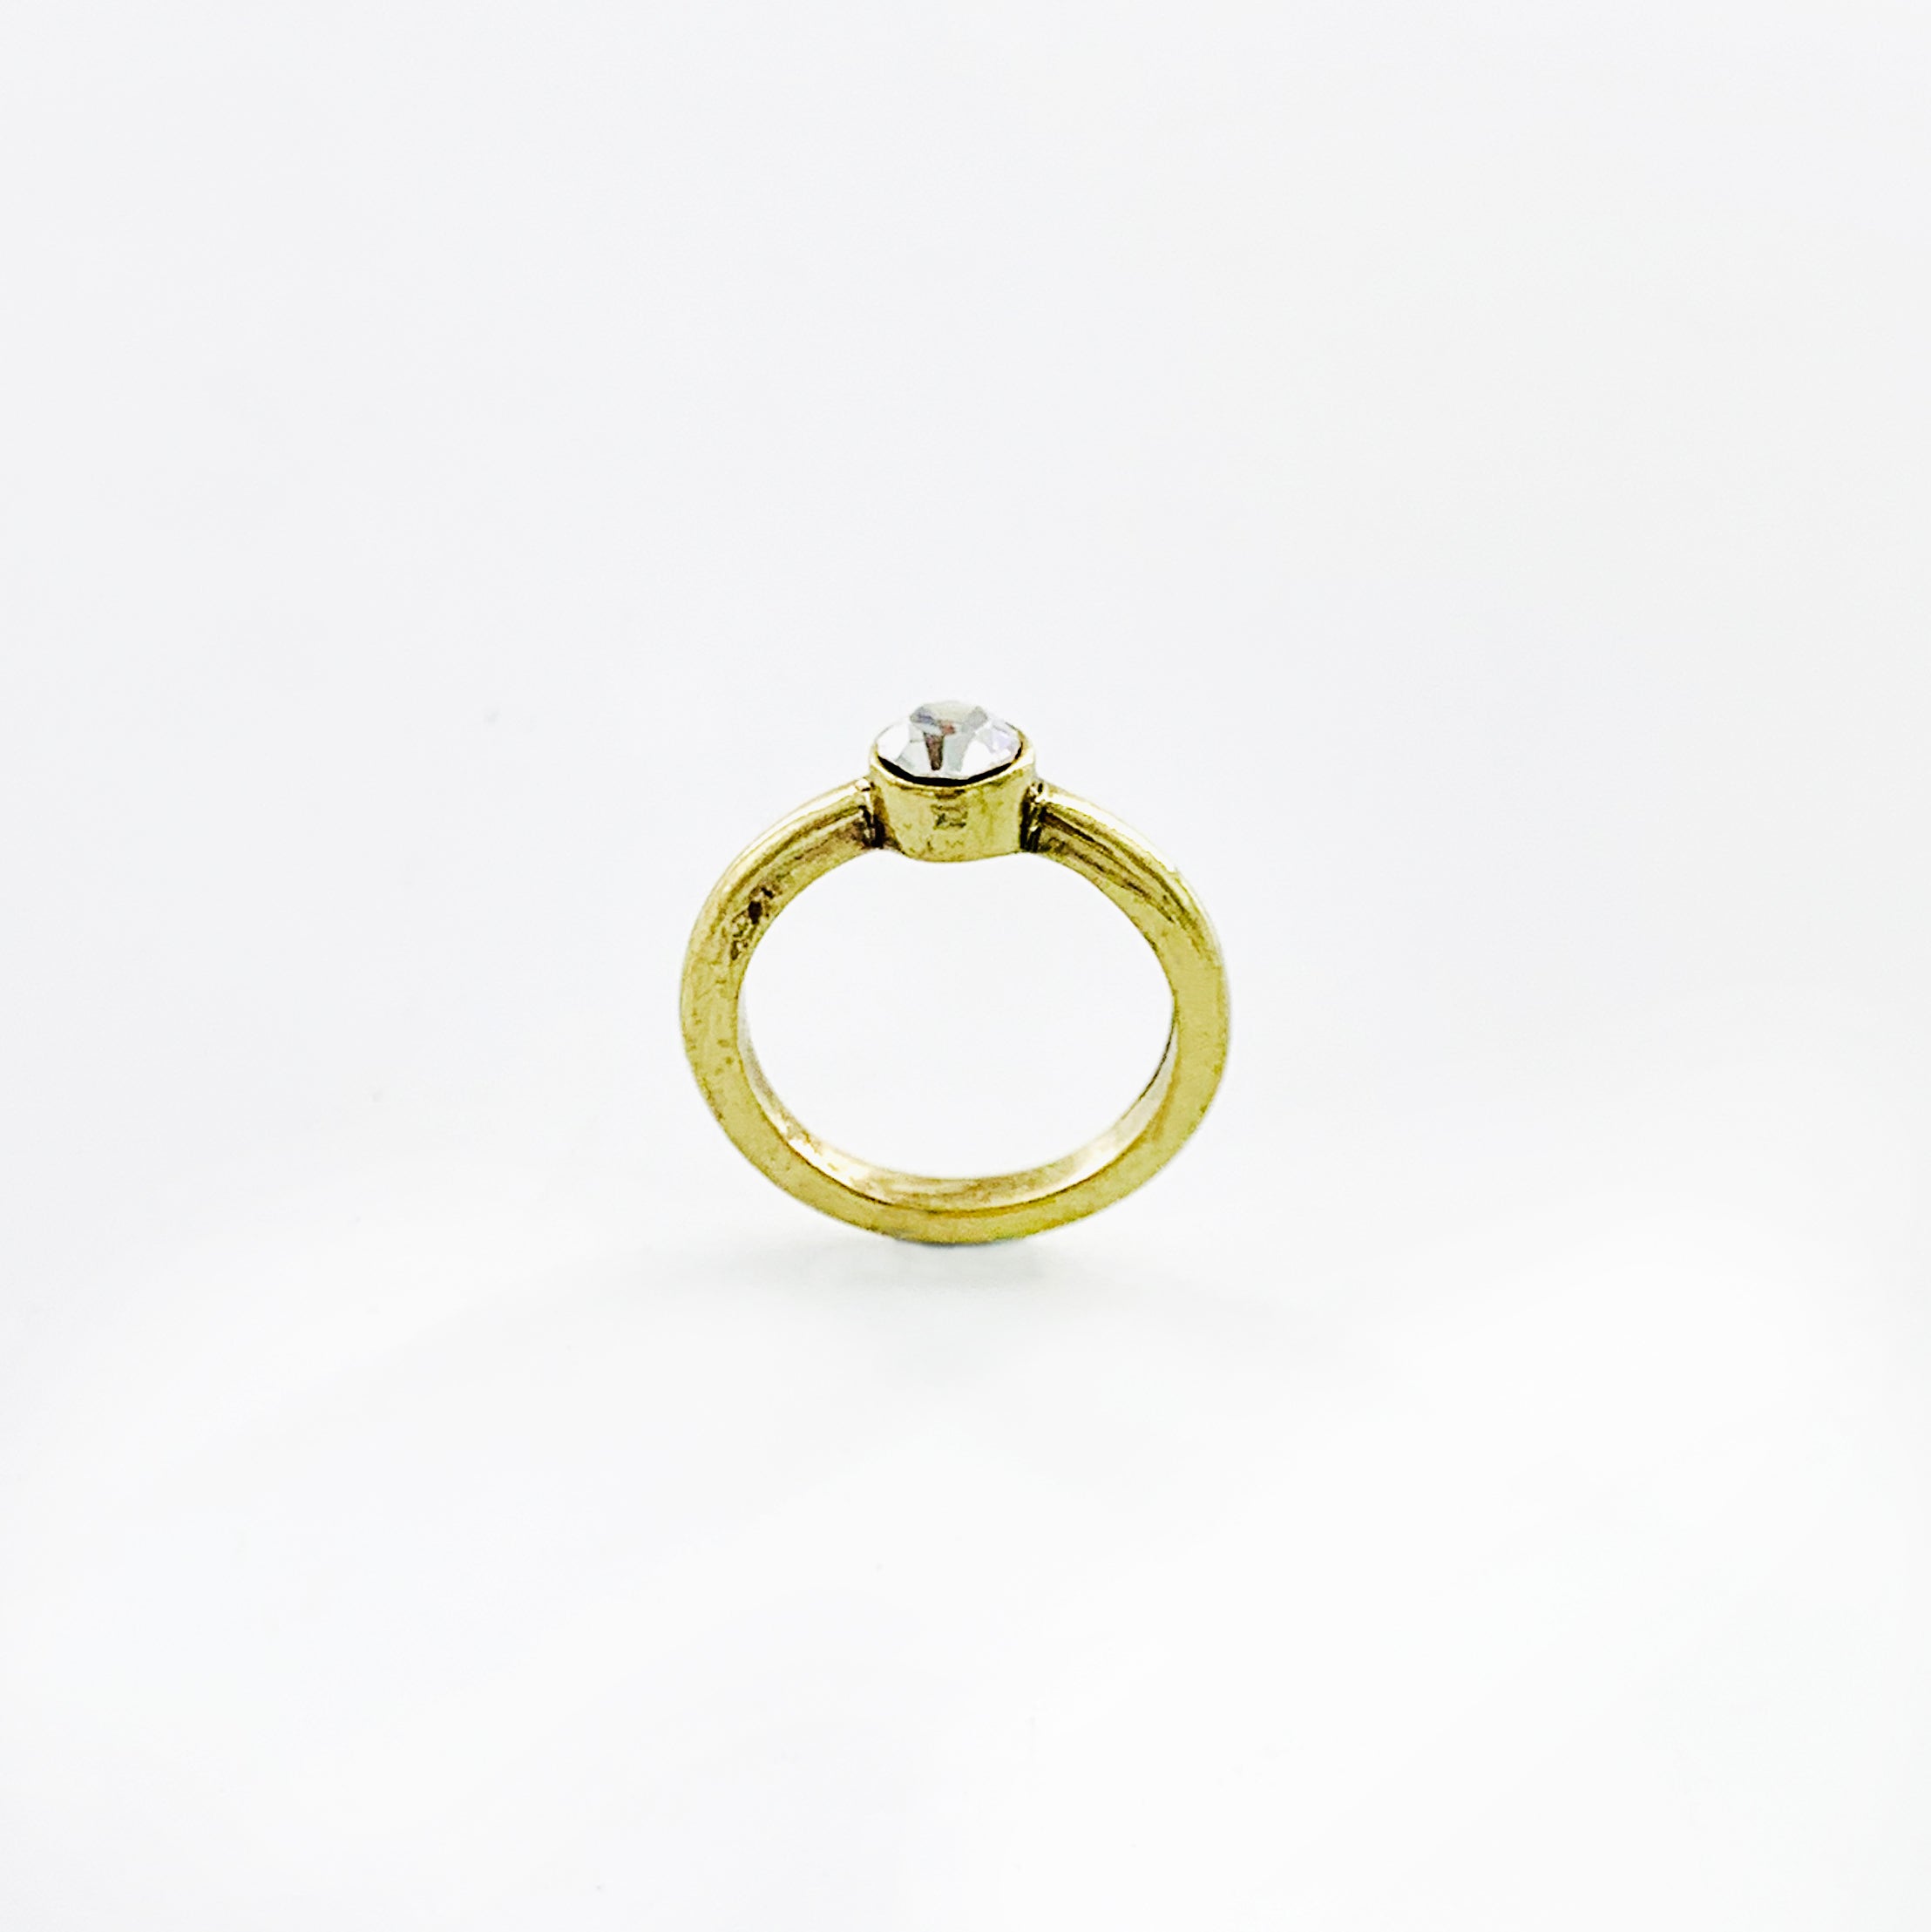 Rustic gold band with small diamante stone